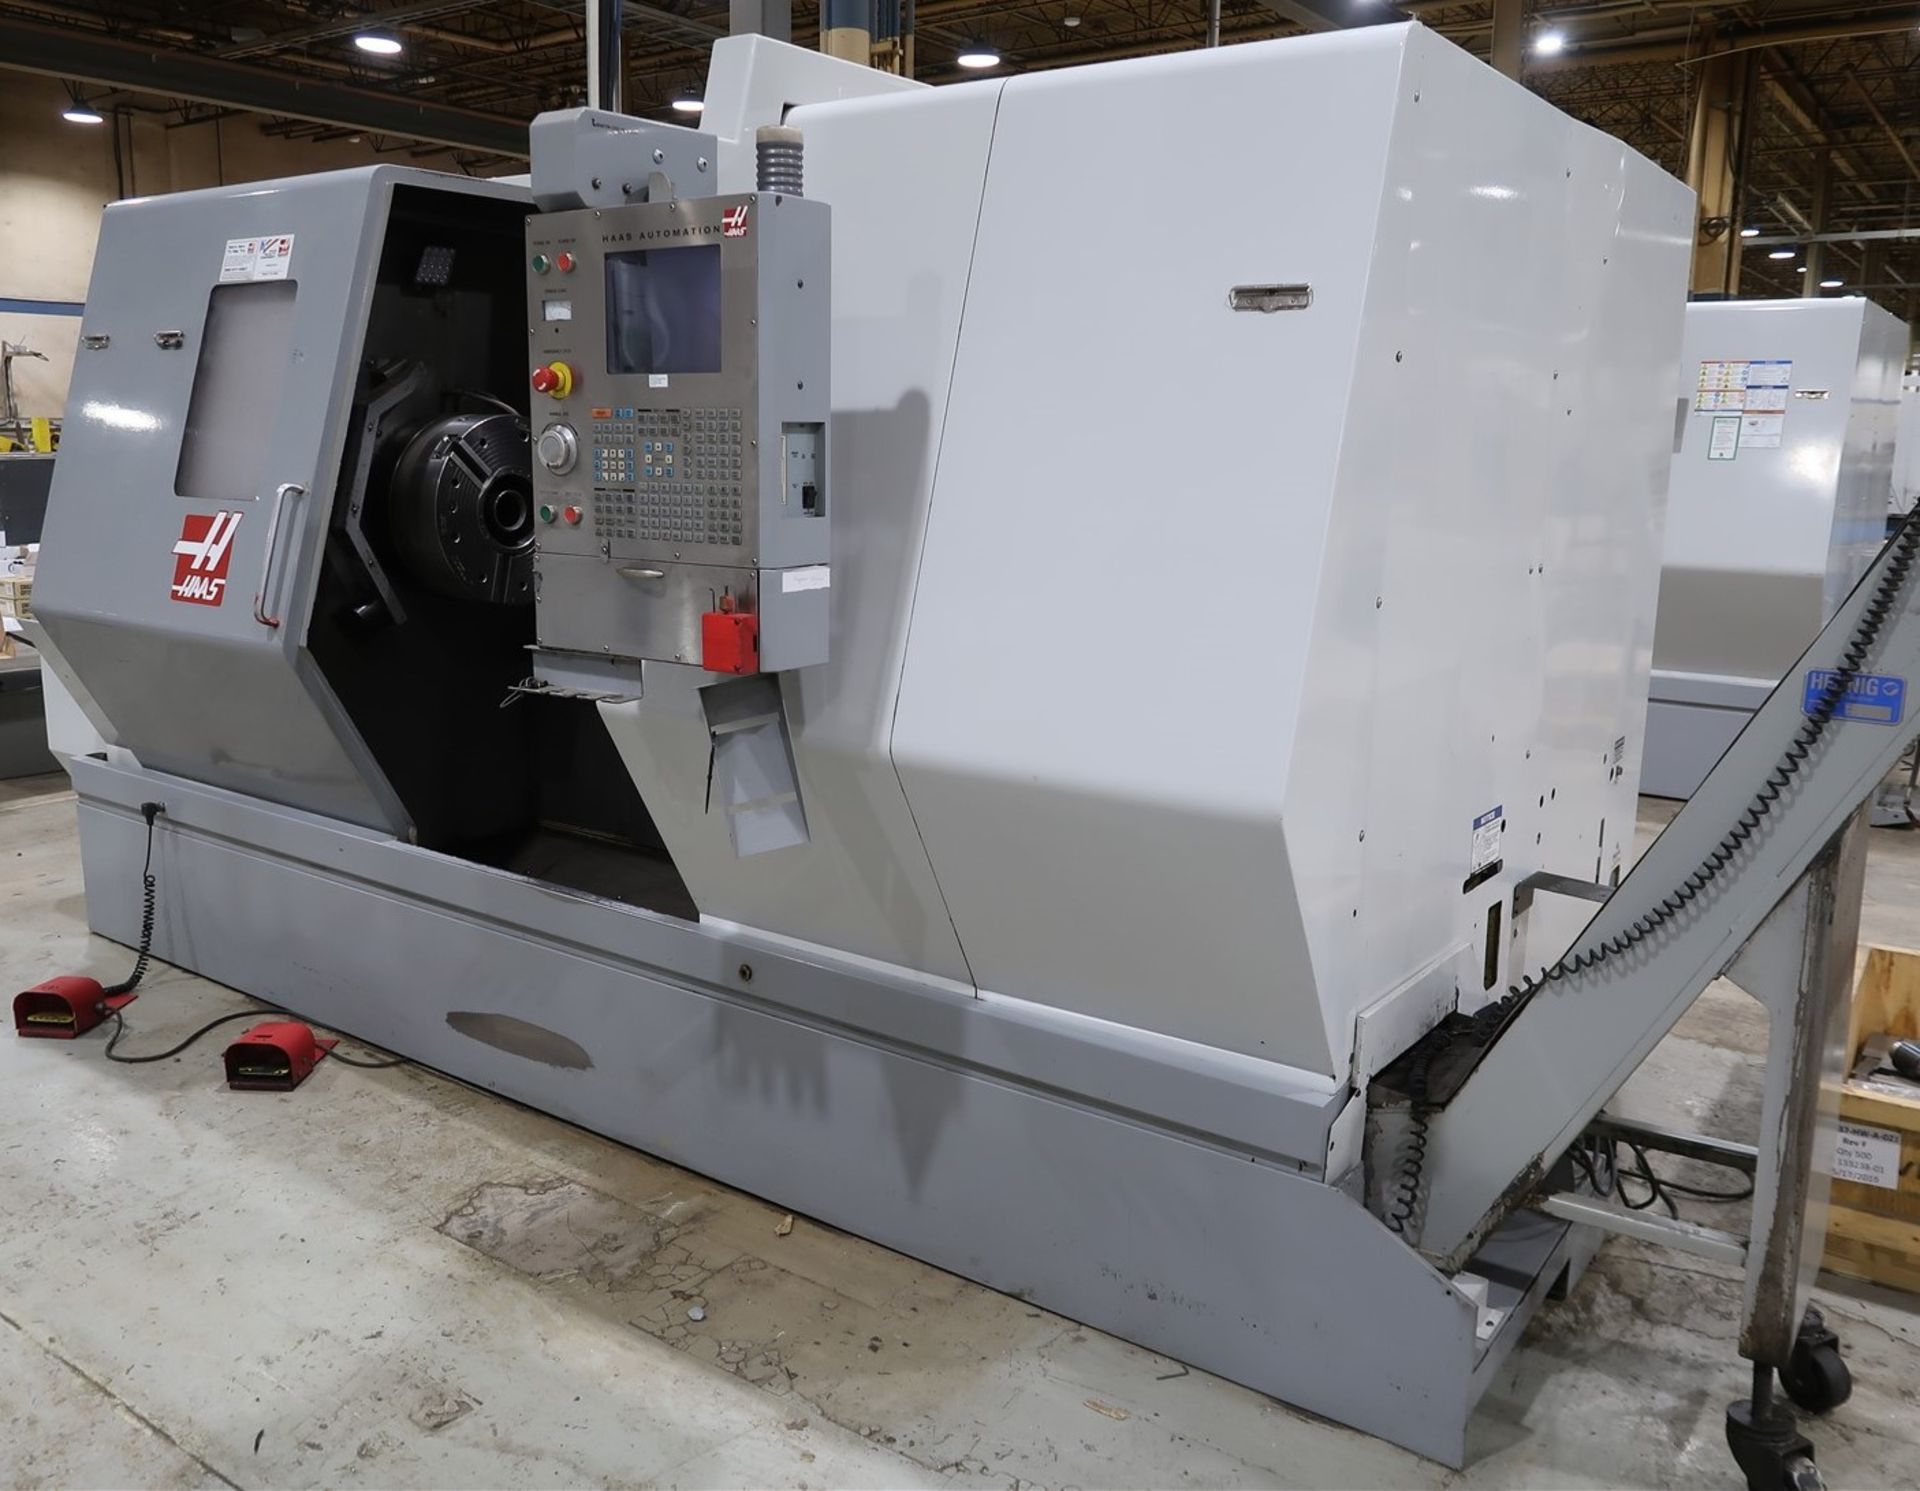 2005 HAAS SL-40TB CNC HORIZONTAL TURNING CENTER, 7.1 IN. BORE, HAAS CNC CONTROL, 10-STATION - Image 11 of 22